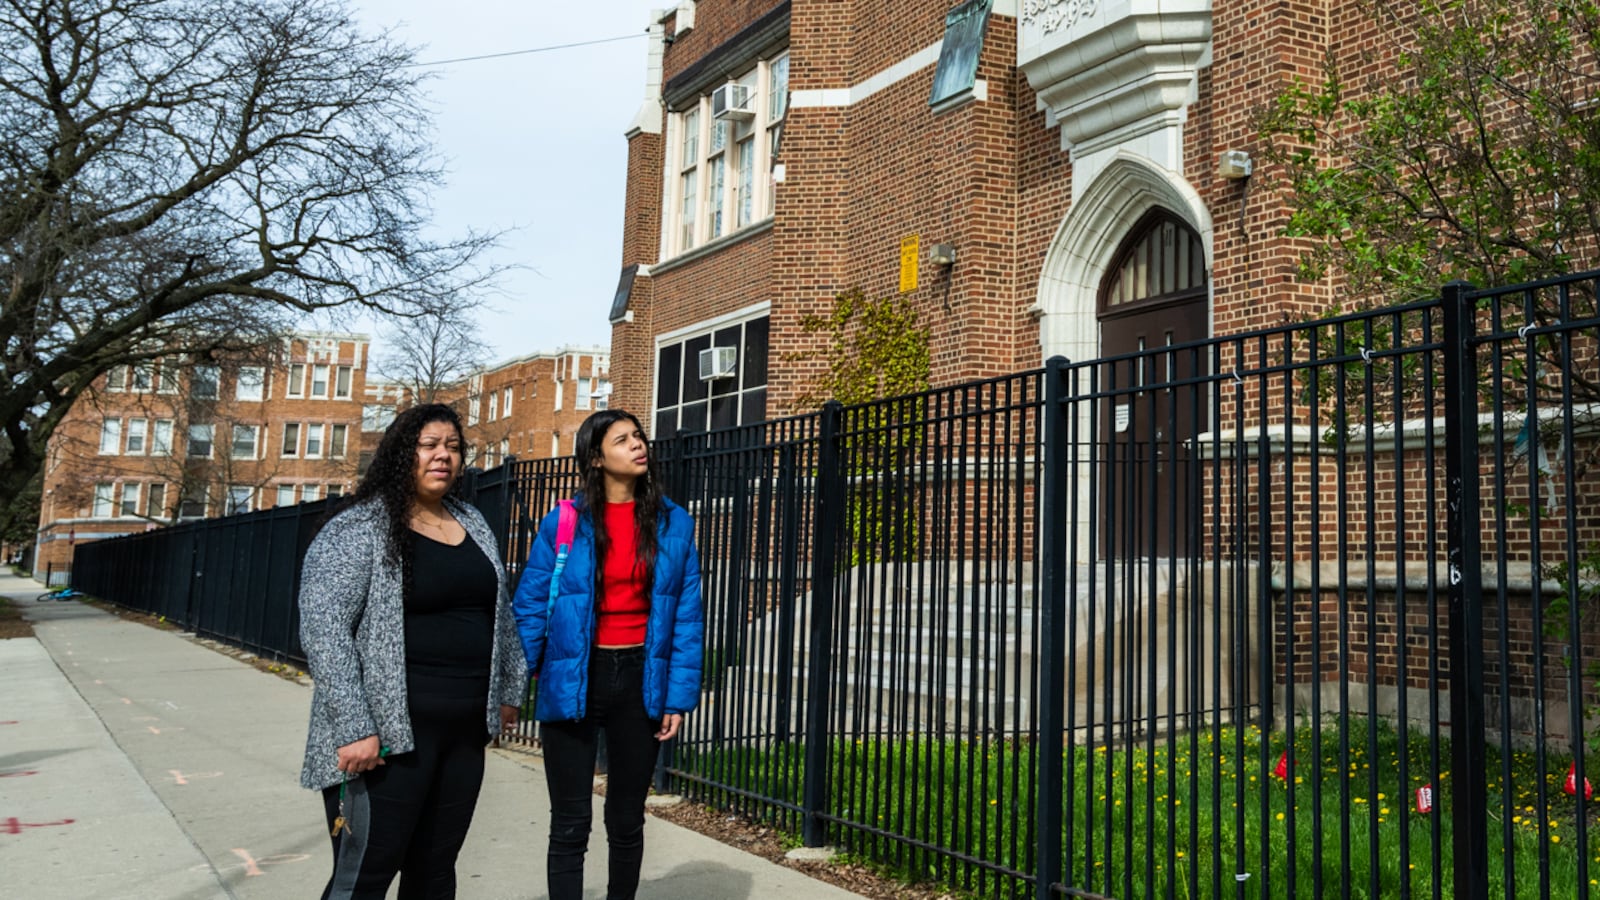 An adult woman and her daughter, both with dark hair and wearing jackets, stand outside of a fenced in brick school building.